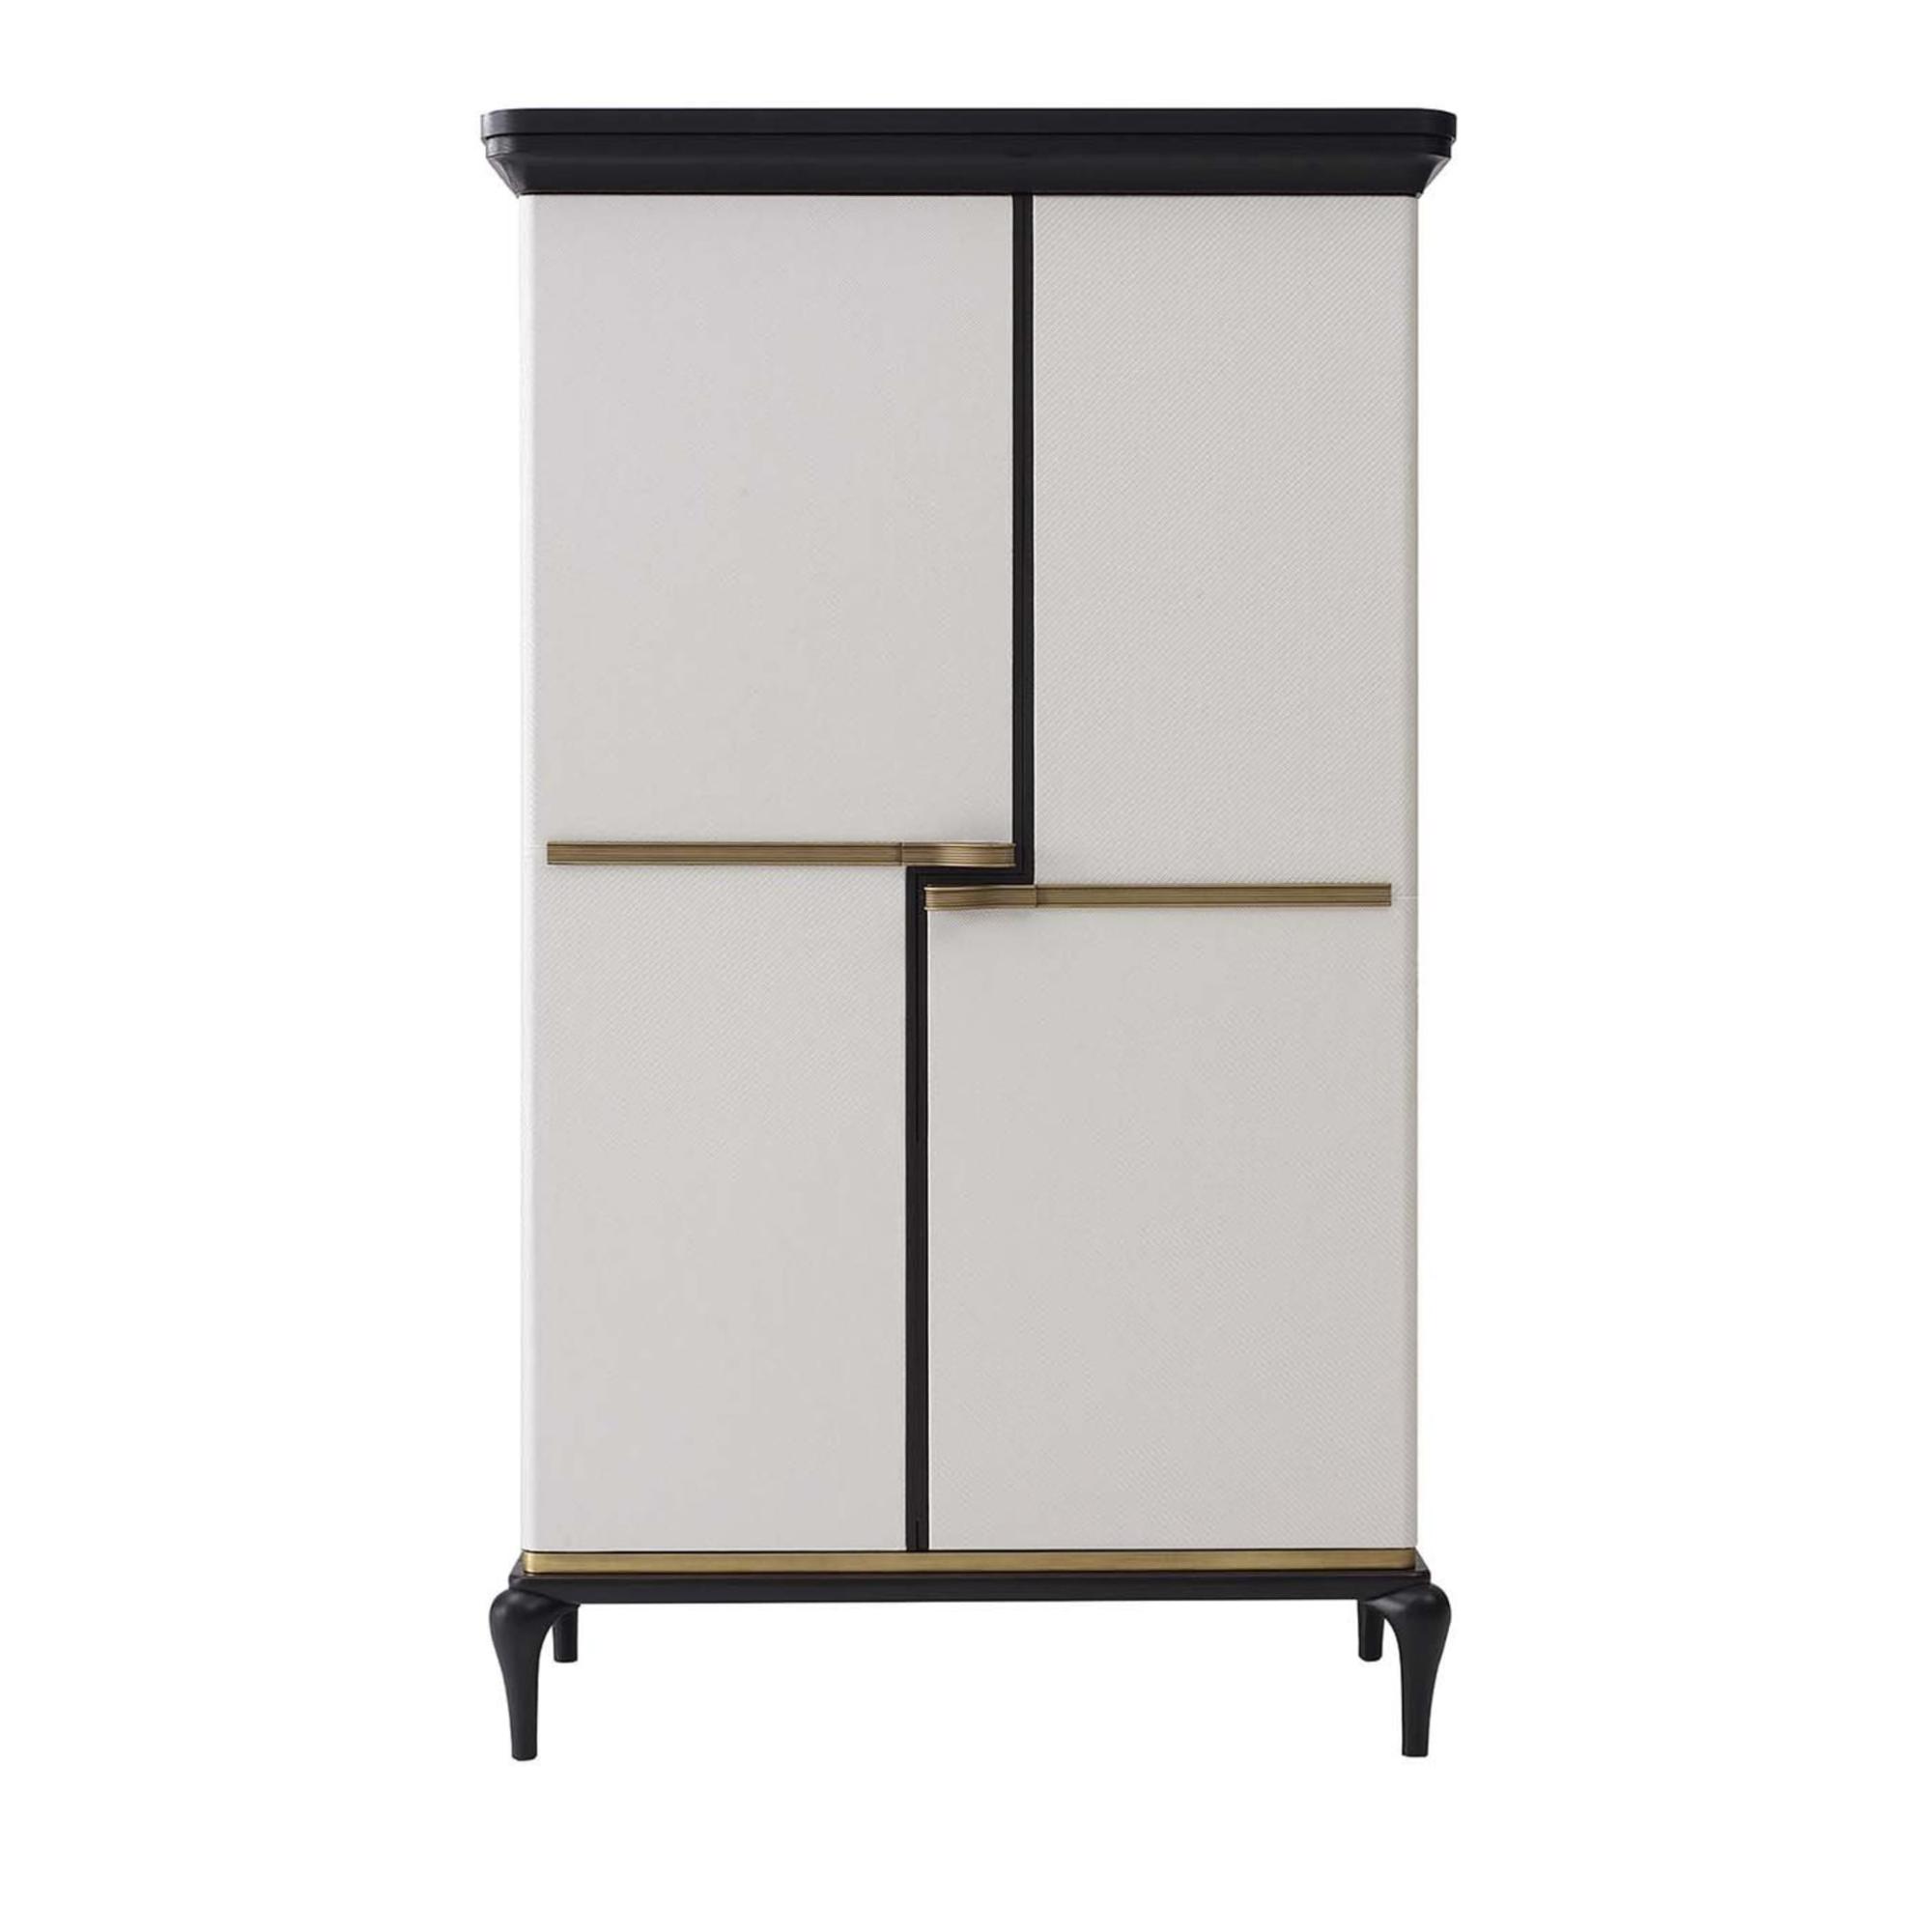 Dilan Bar Cabinet Crafted in Italy